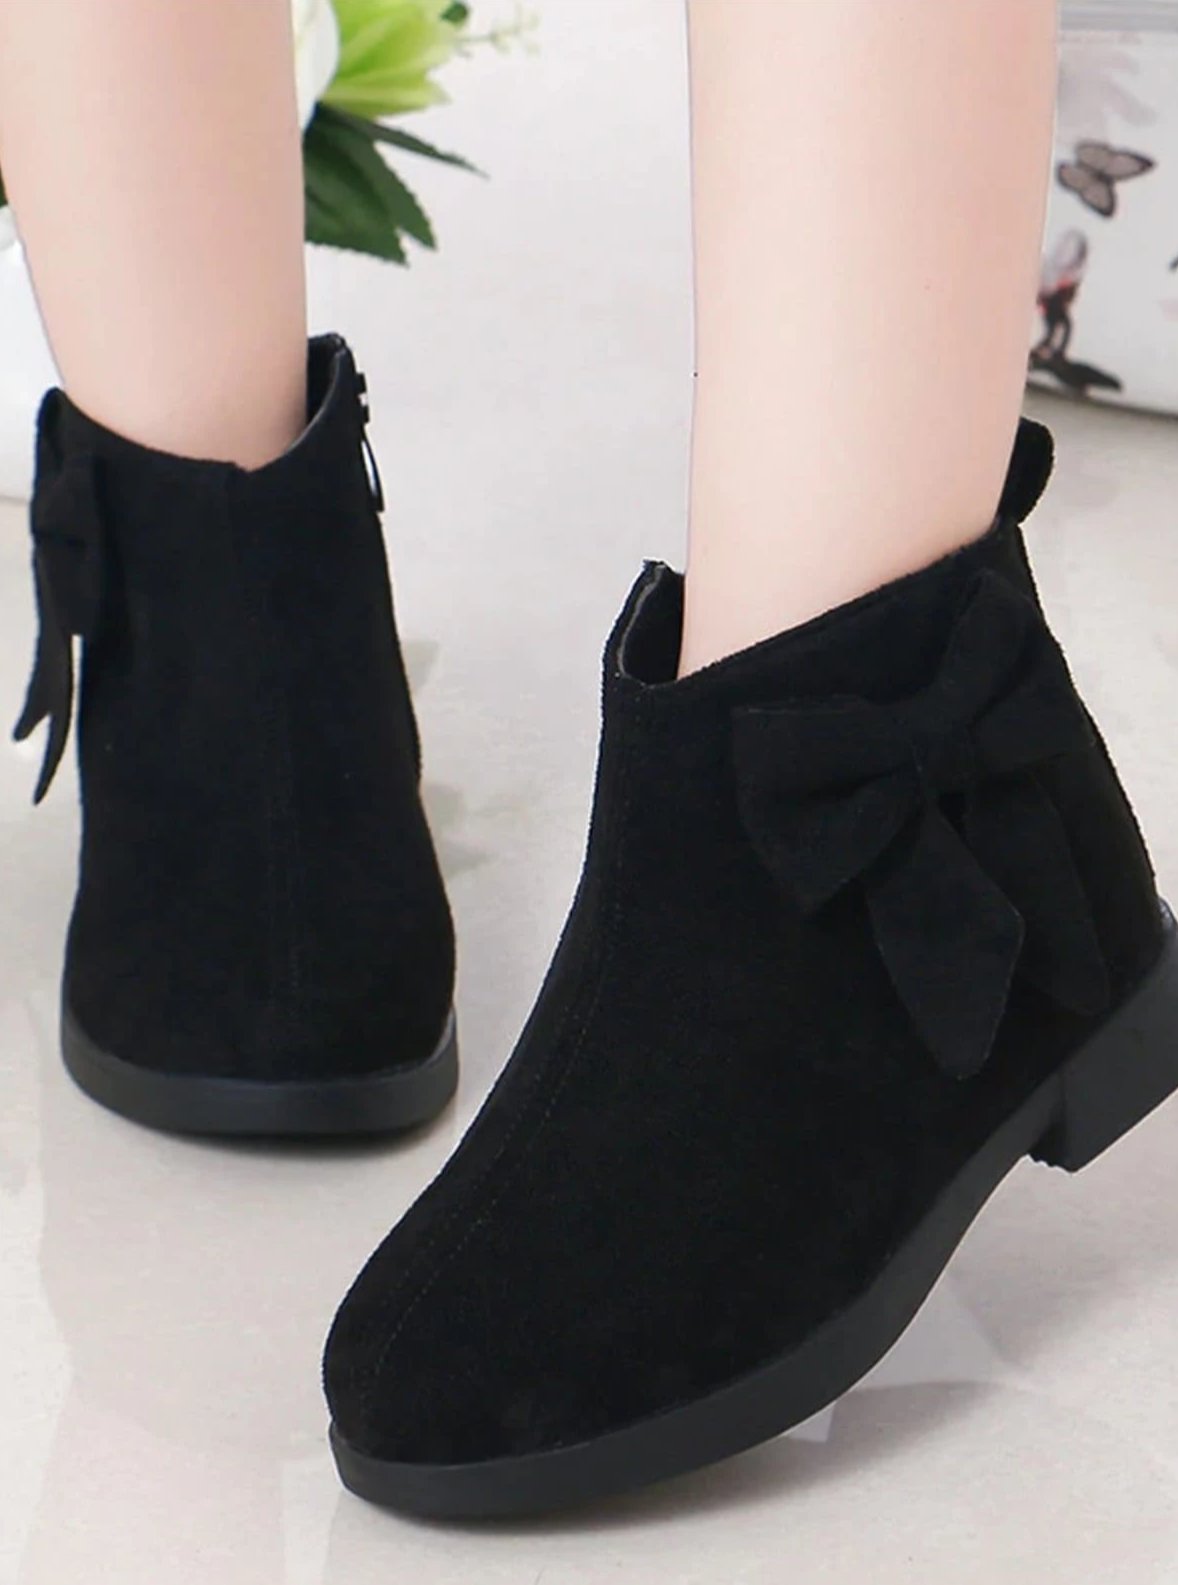 Girls Suede Bow Side Ankle Booties - Black / 1 - Girls Boots